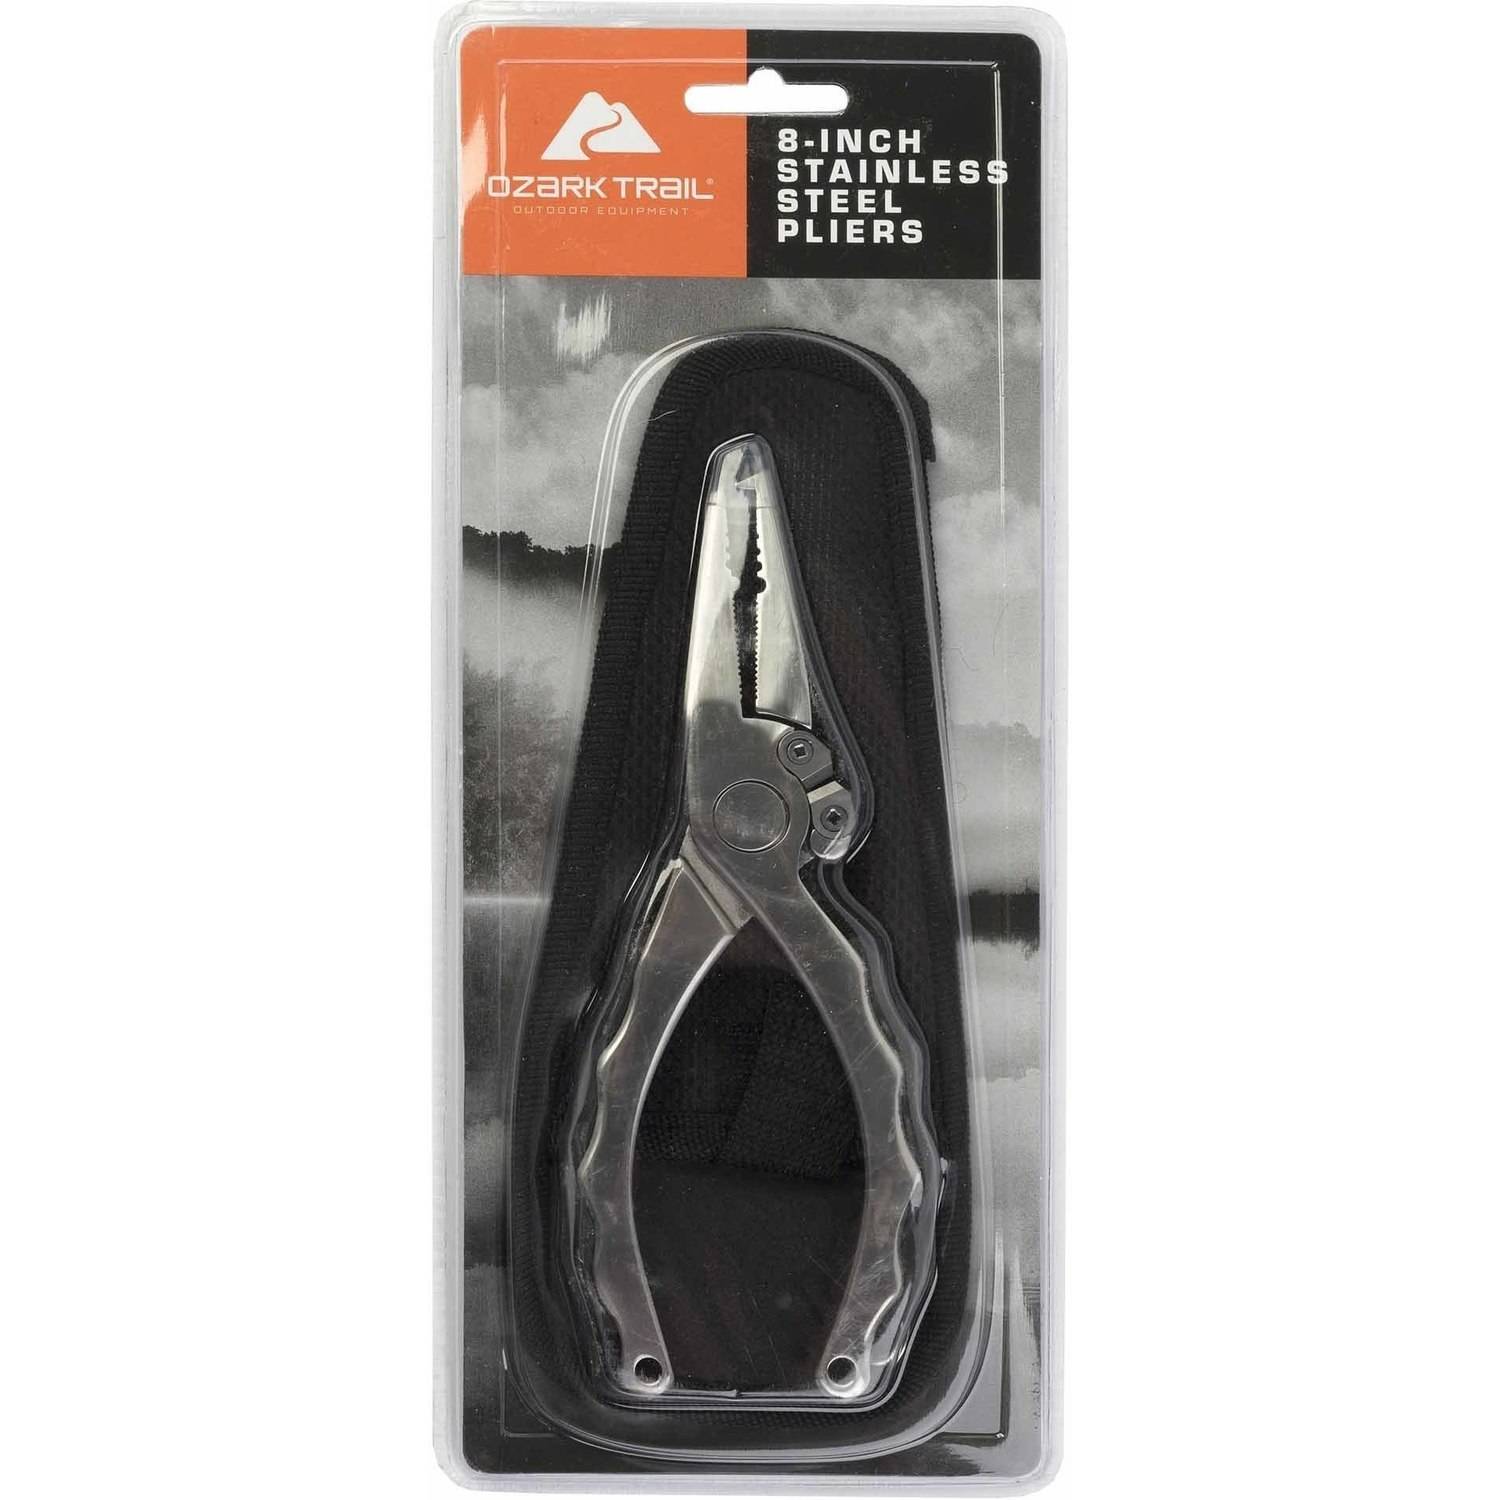 Ozark Trail 8-Inch Stainless Steel Pliers with Sheath - image 2 of 3